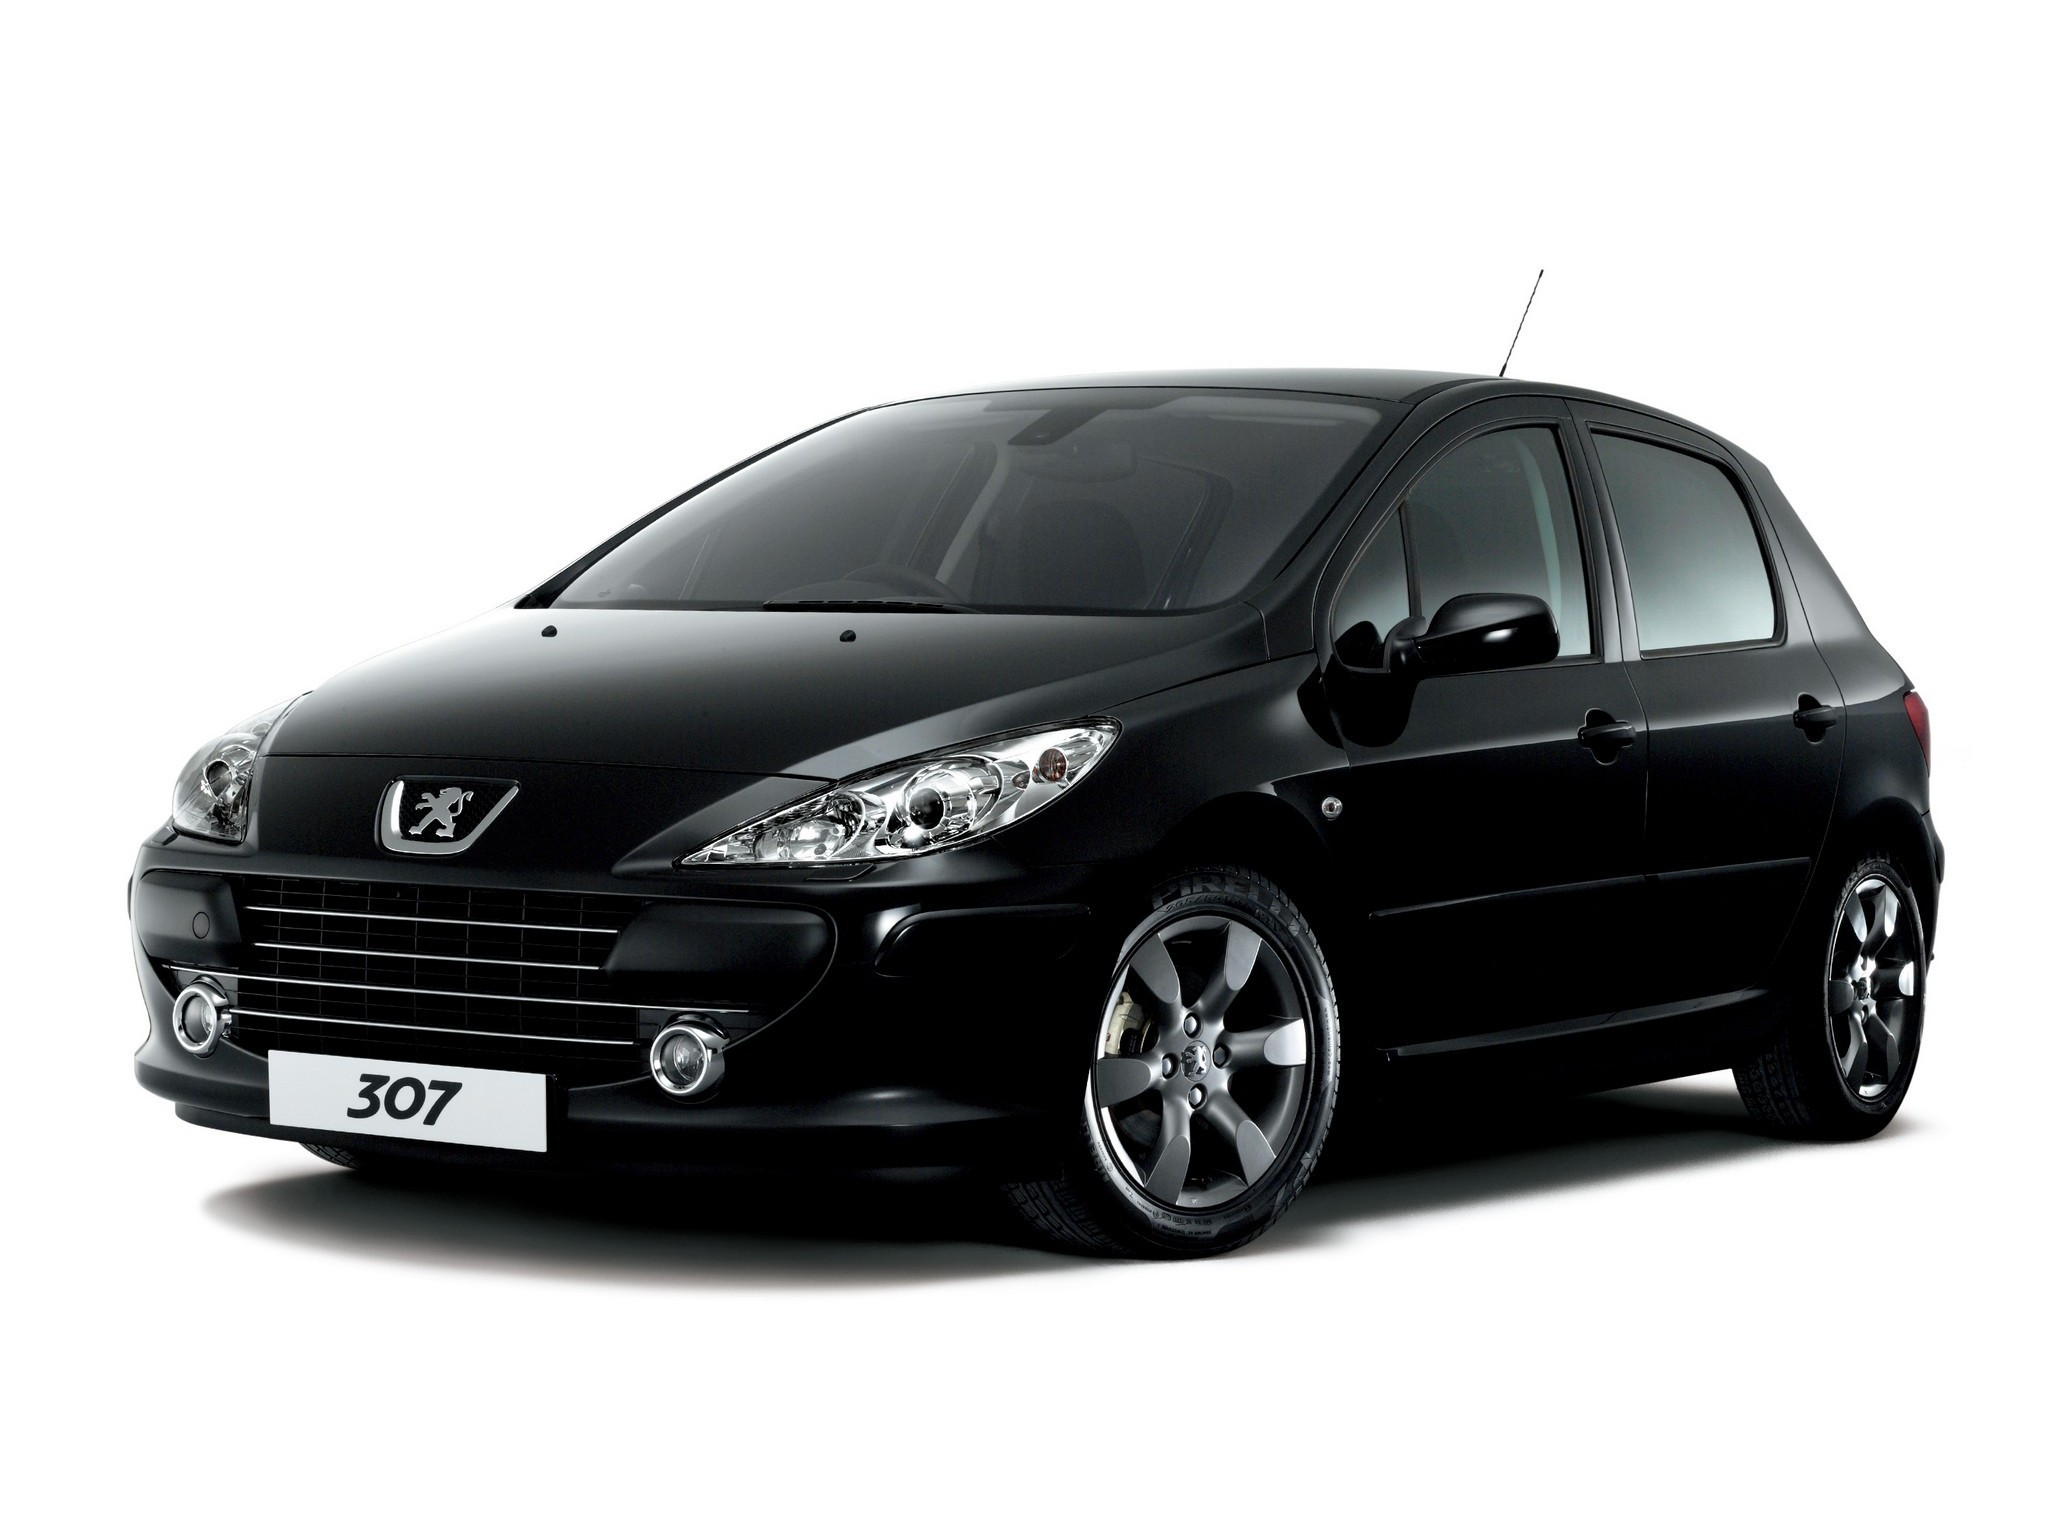 Nice Images Collection: Peugeot 307 Desktop Wallpapers